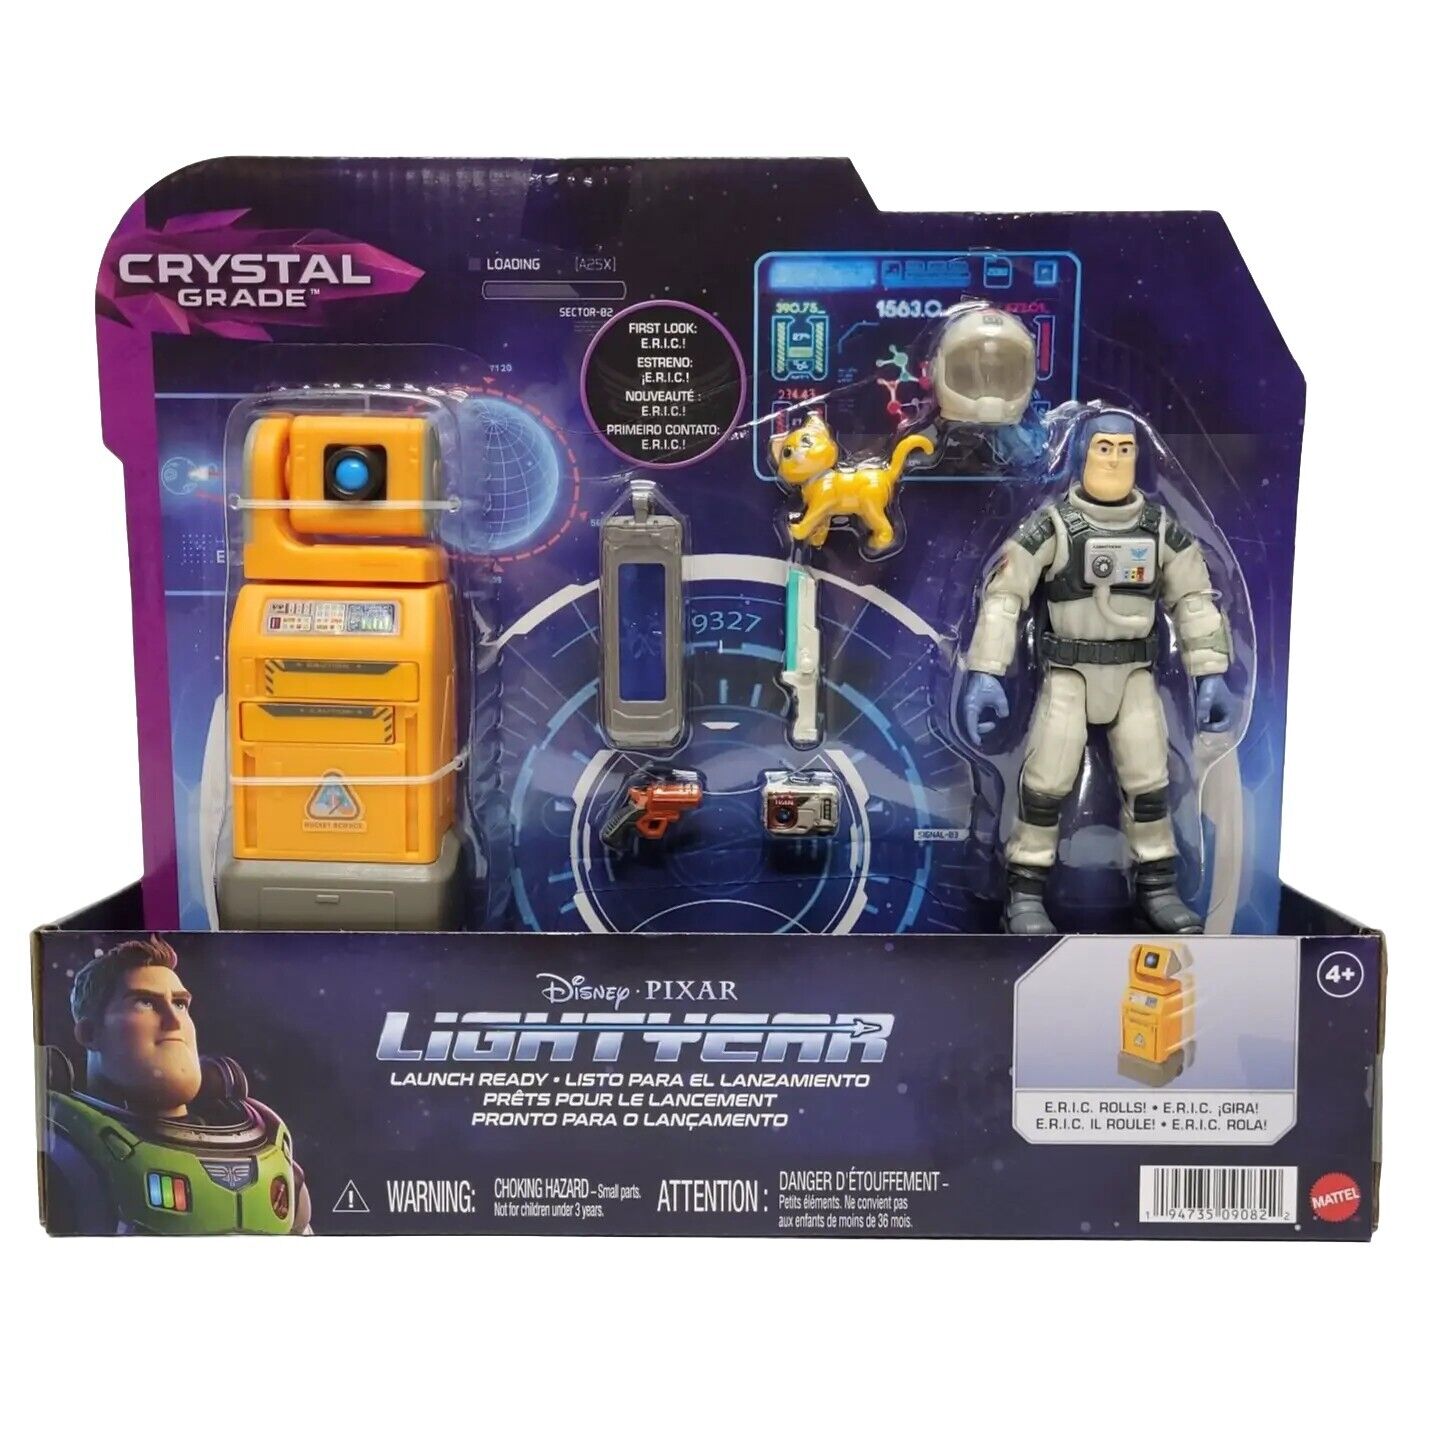 Toy Story Lightyear Crystal Grade Launch Ready Buzz & Eric Action Figure Set 